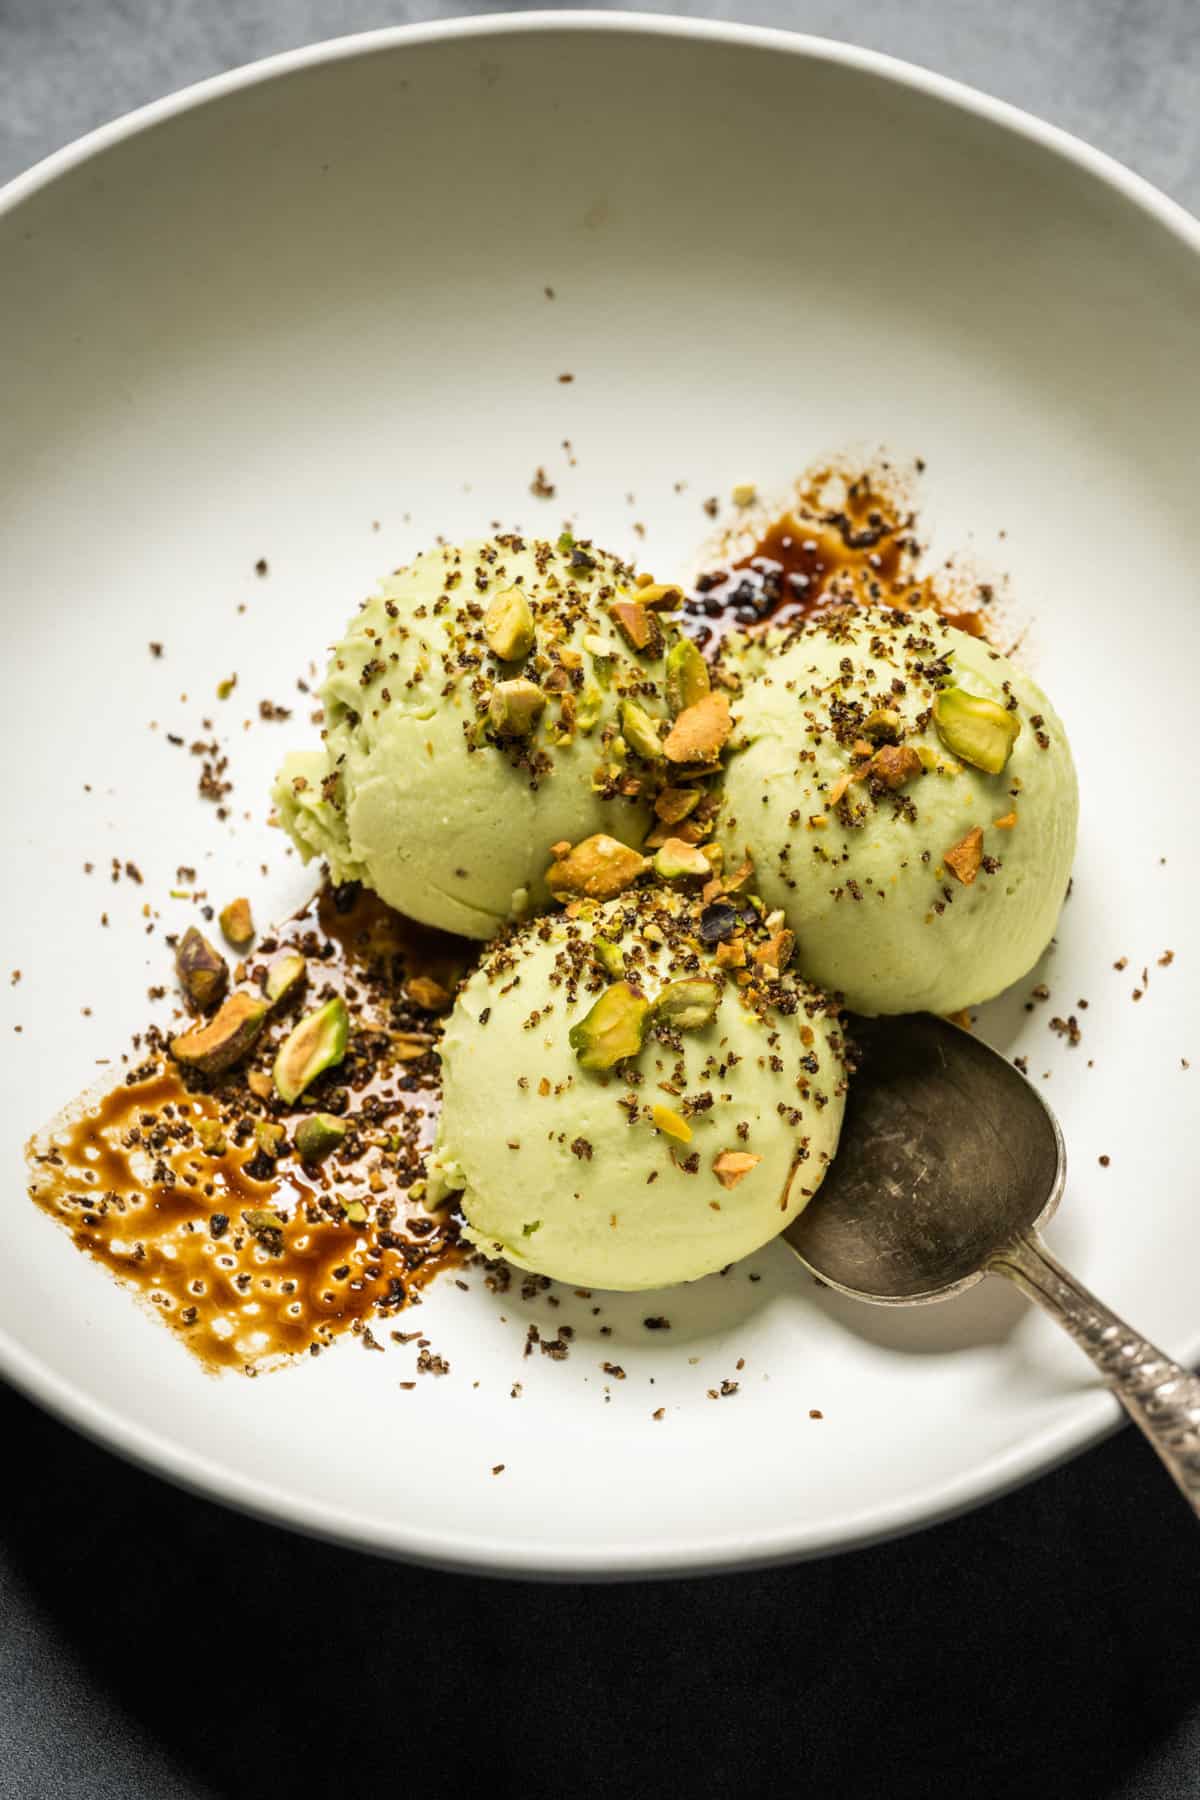 Should you use avocado in desserts?